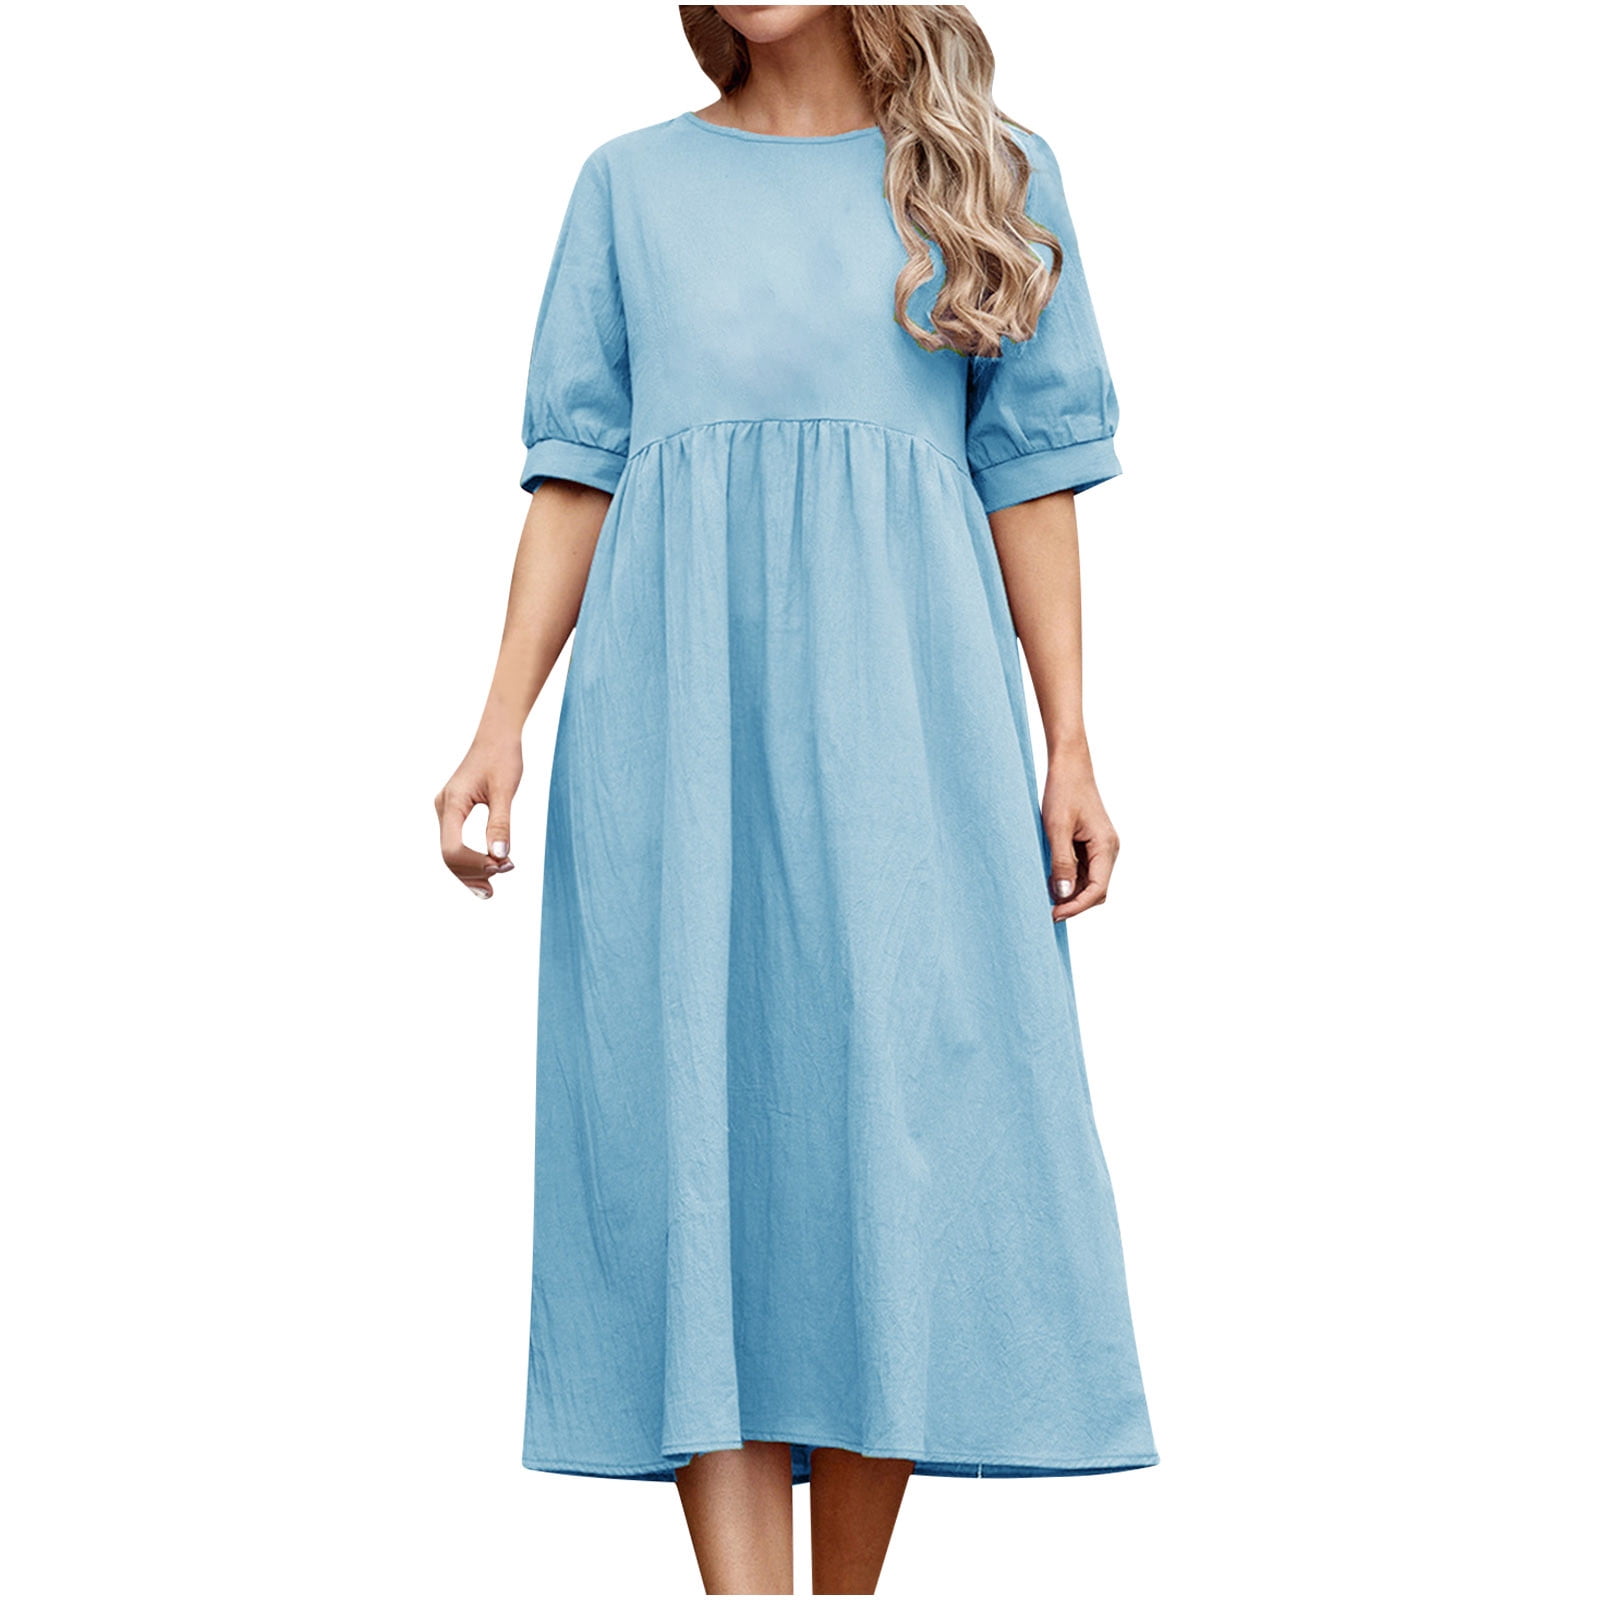 Auroural Womens Dresses Clearance Women's Summer Fashion Round Neck Short  Sleeve Solid Color Loose Dress 